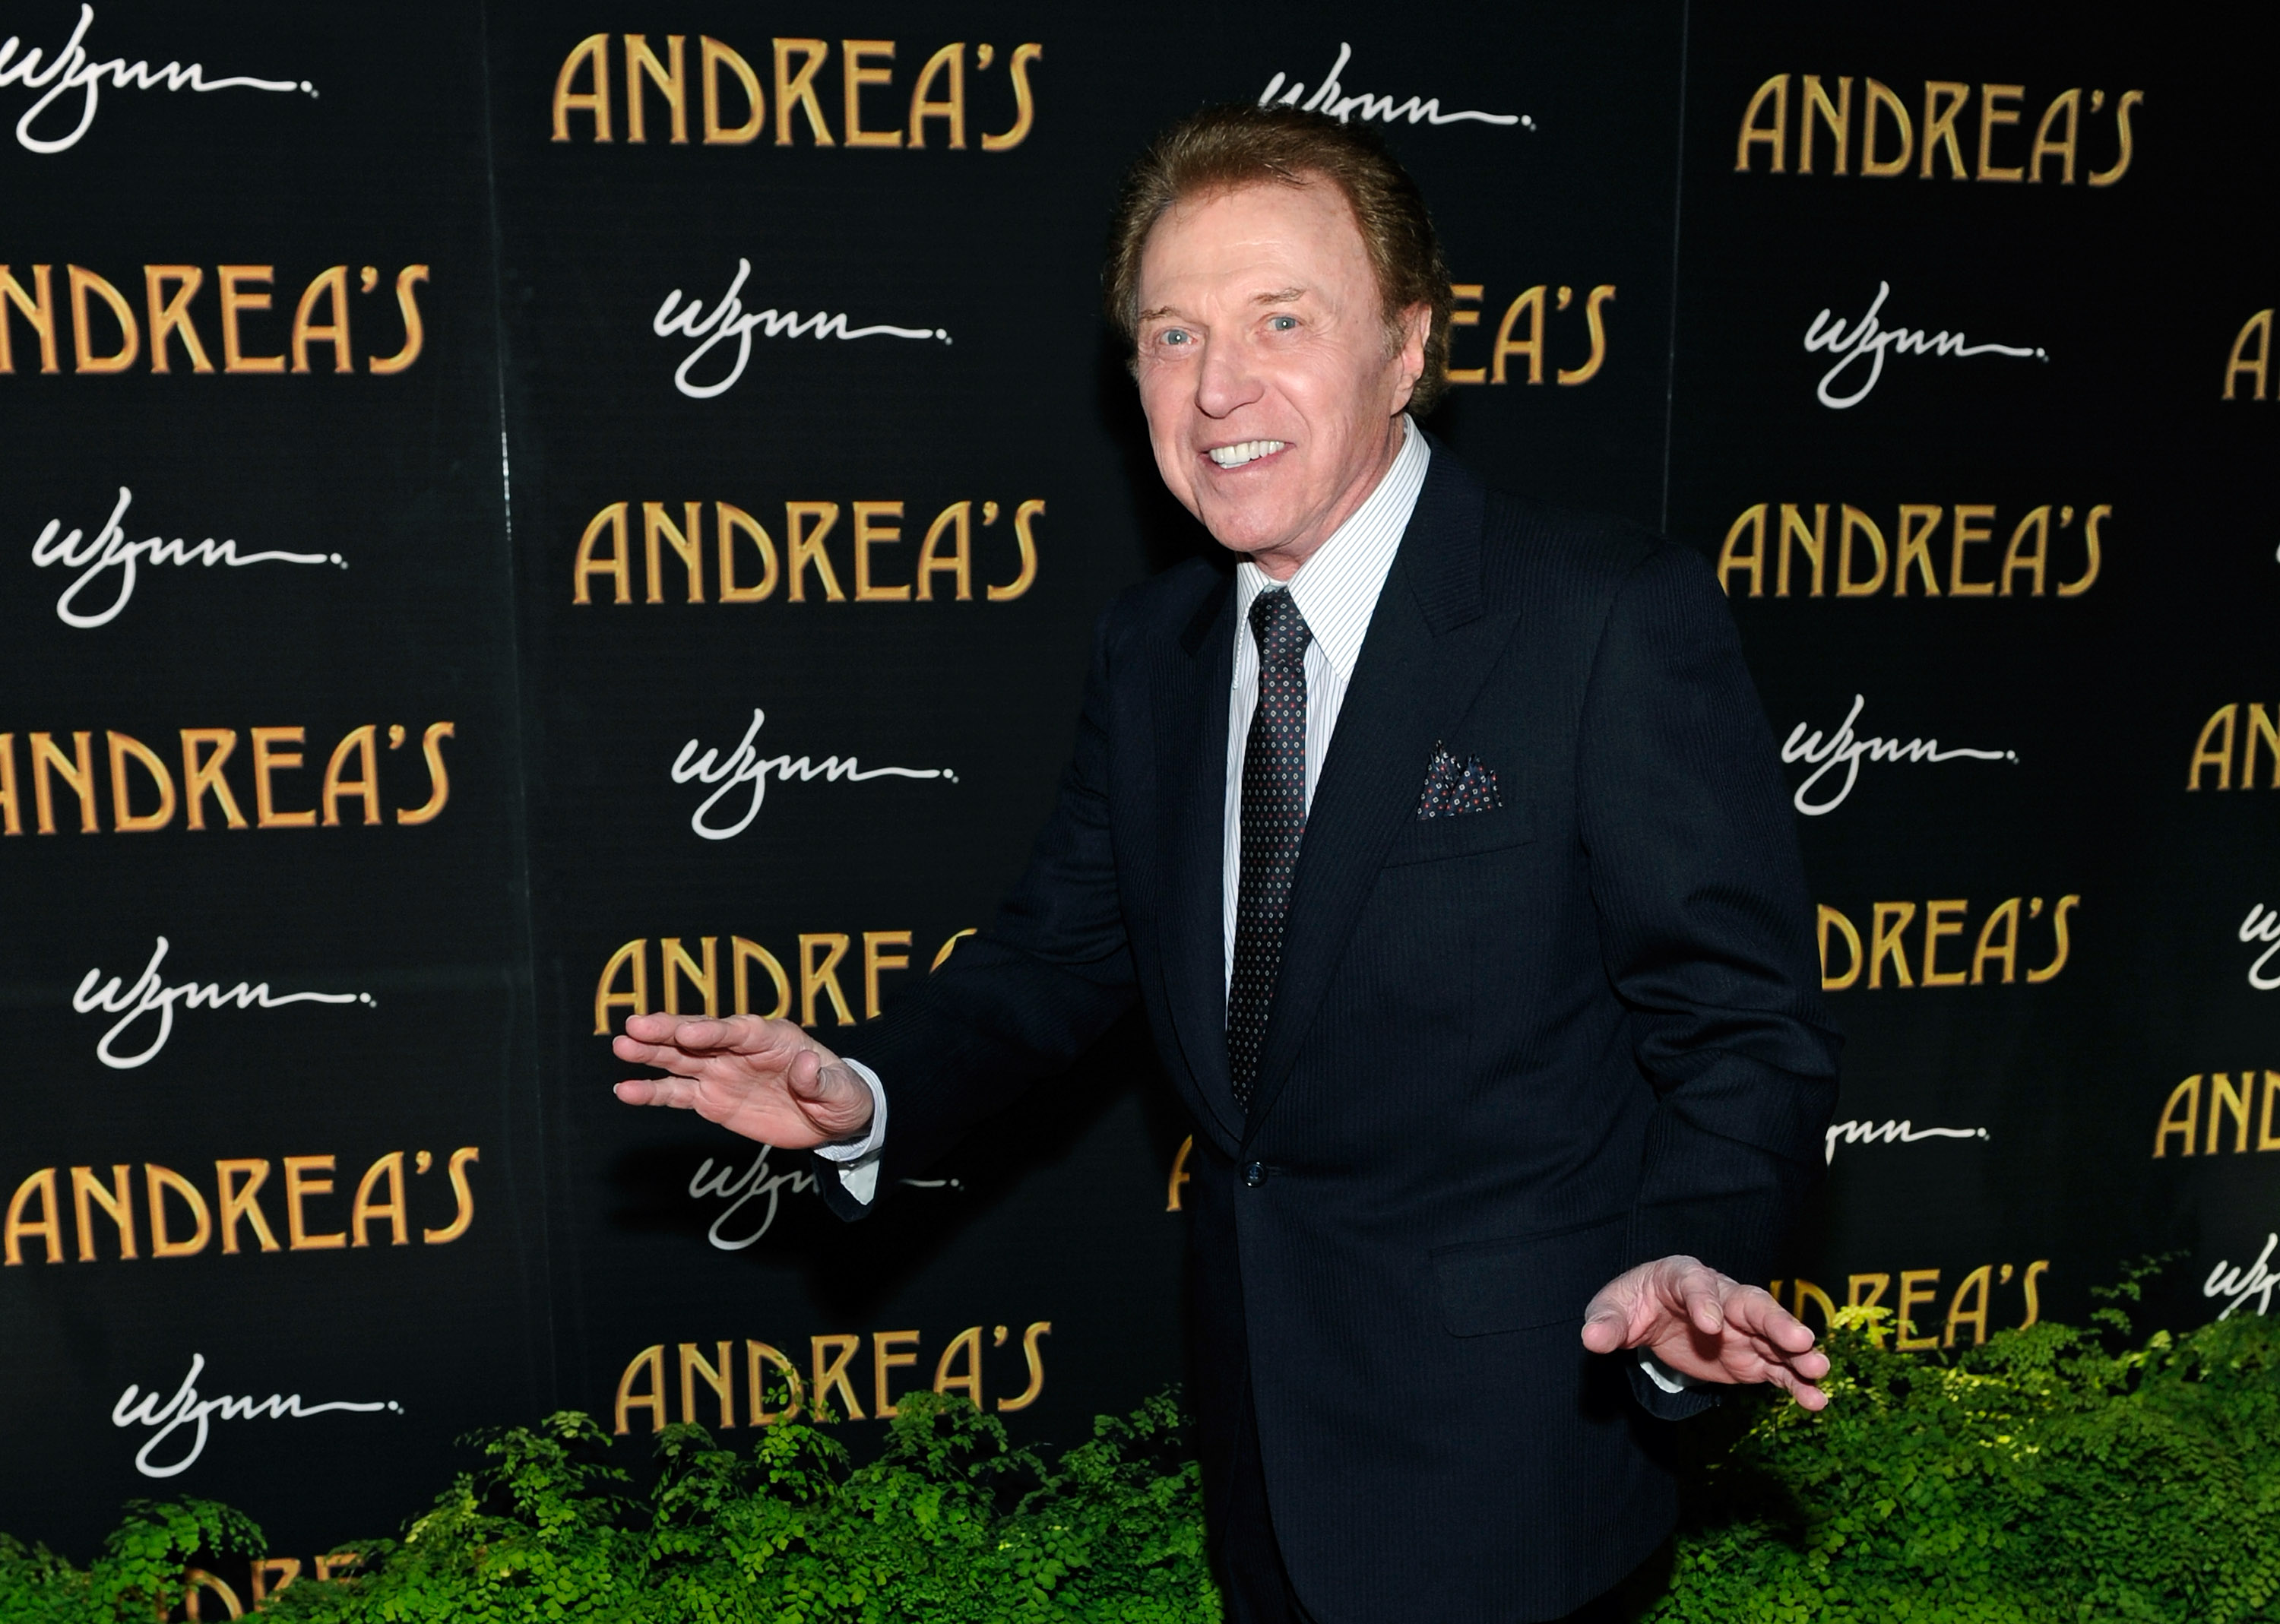 Steve Lawrence during the celebration at Andrea's at the Wynn Las Vegas on January 16, 2013, in Las Vegas, Nevada. | Source: Getty Images